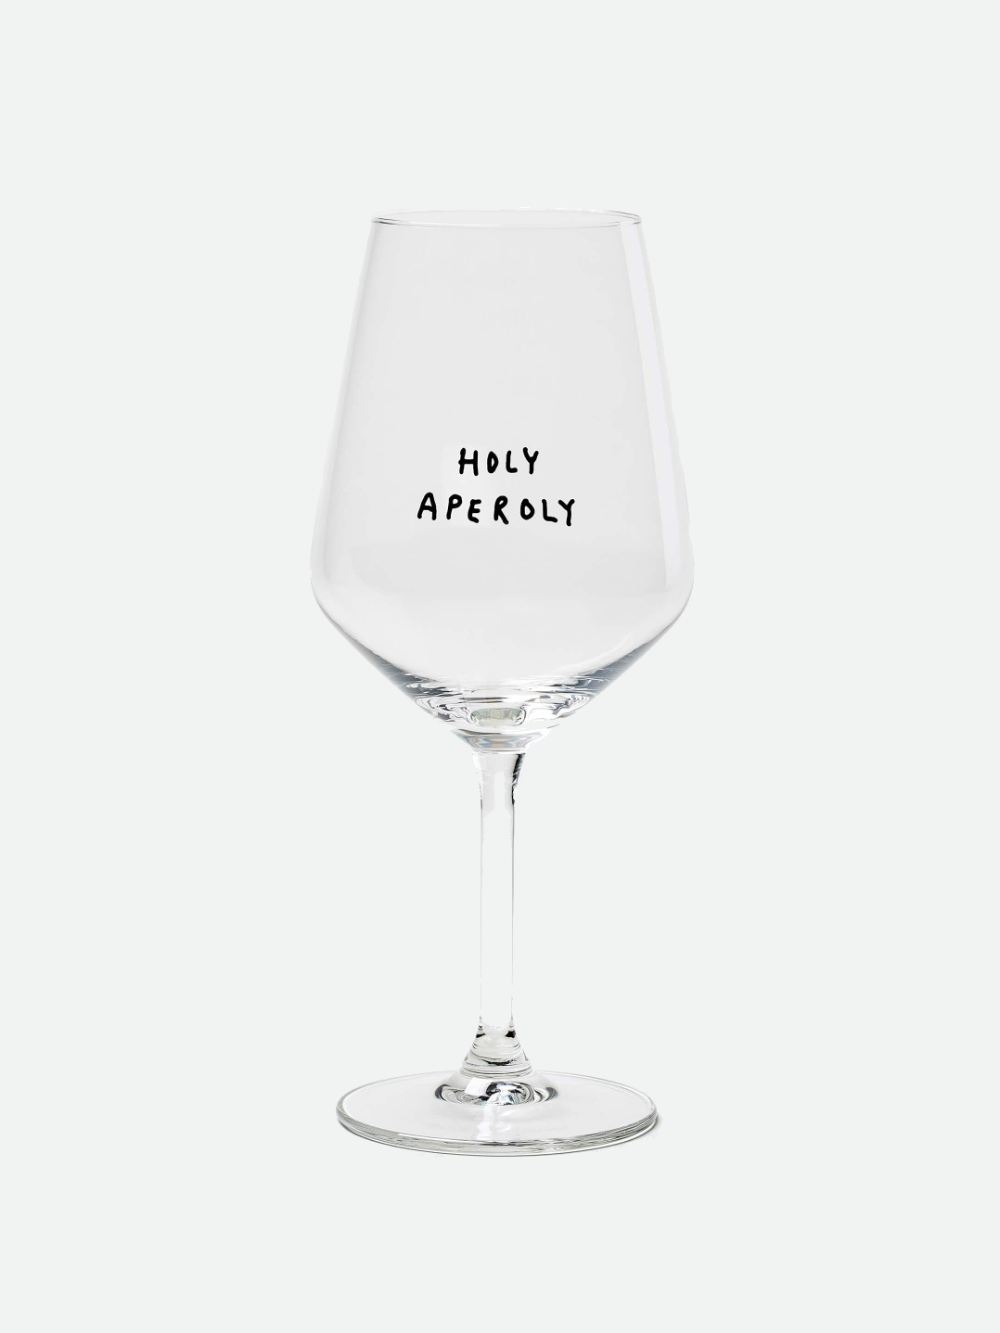 Holy Aperoly Wine Glass